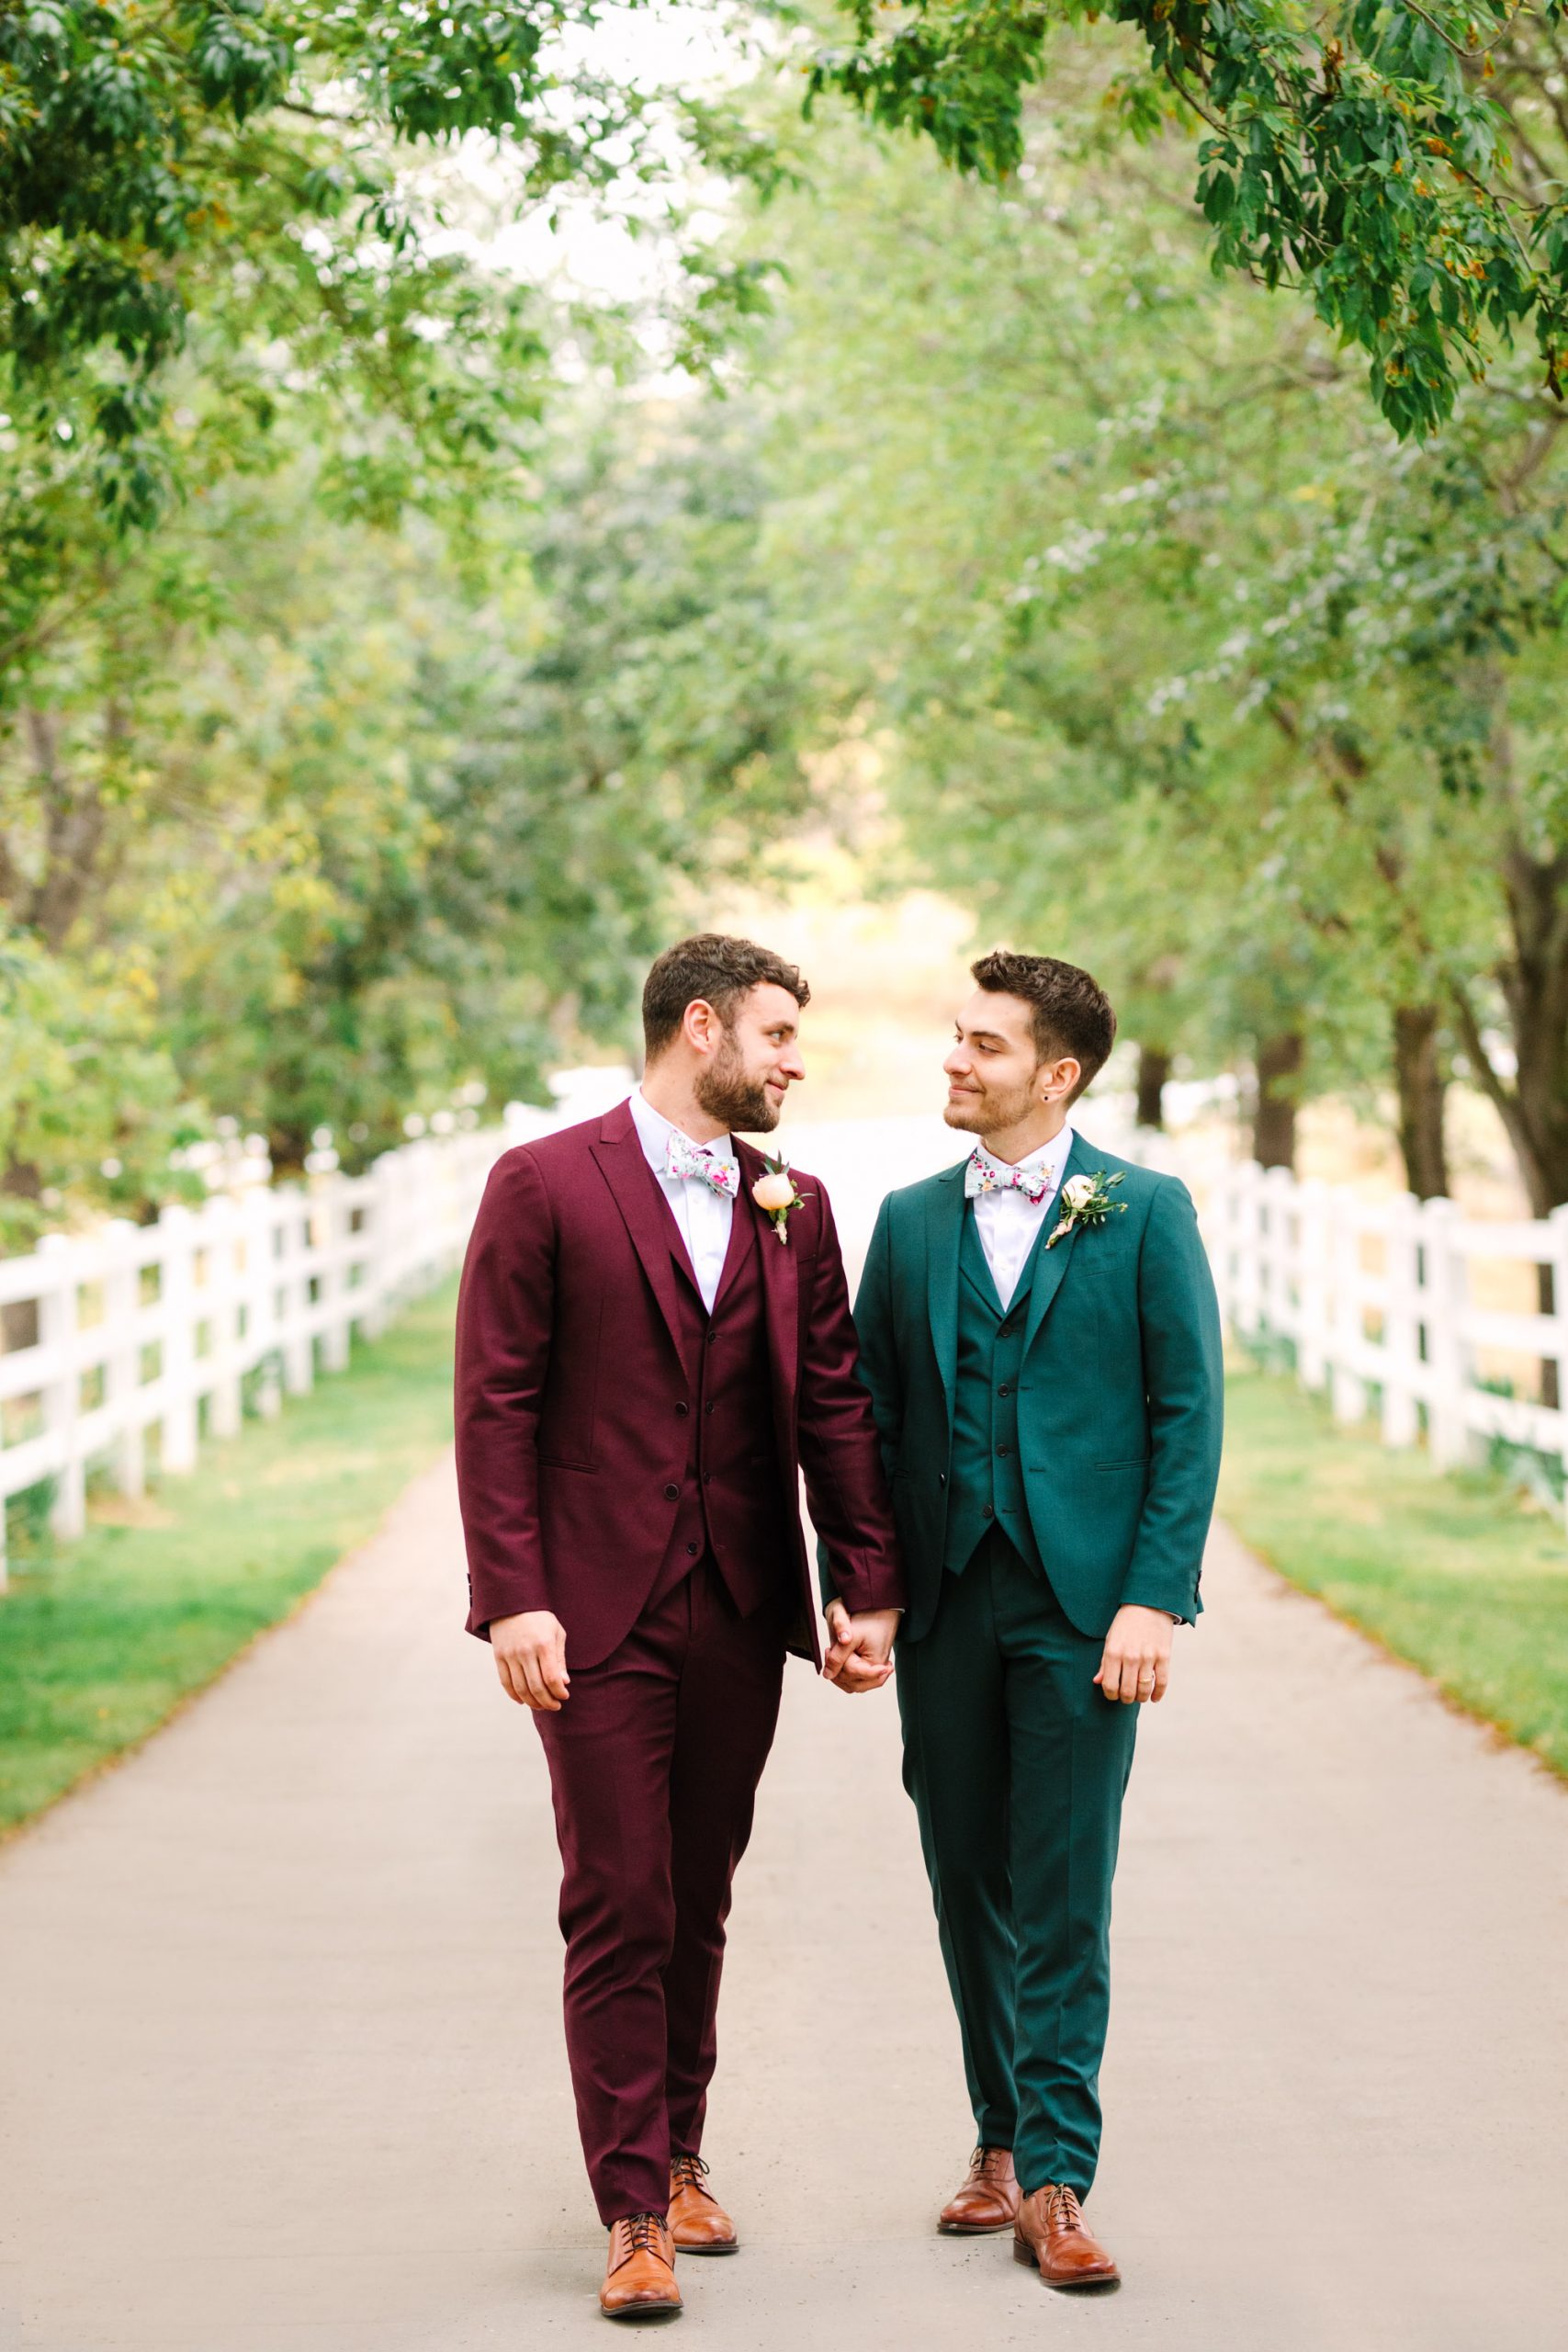 Two grooms walking by Mary Costa Photography